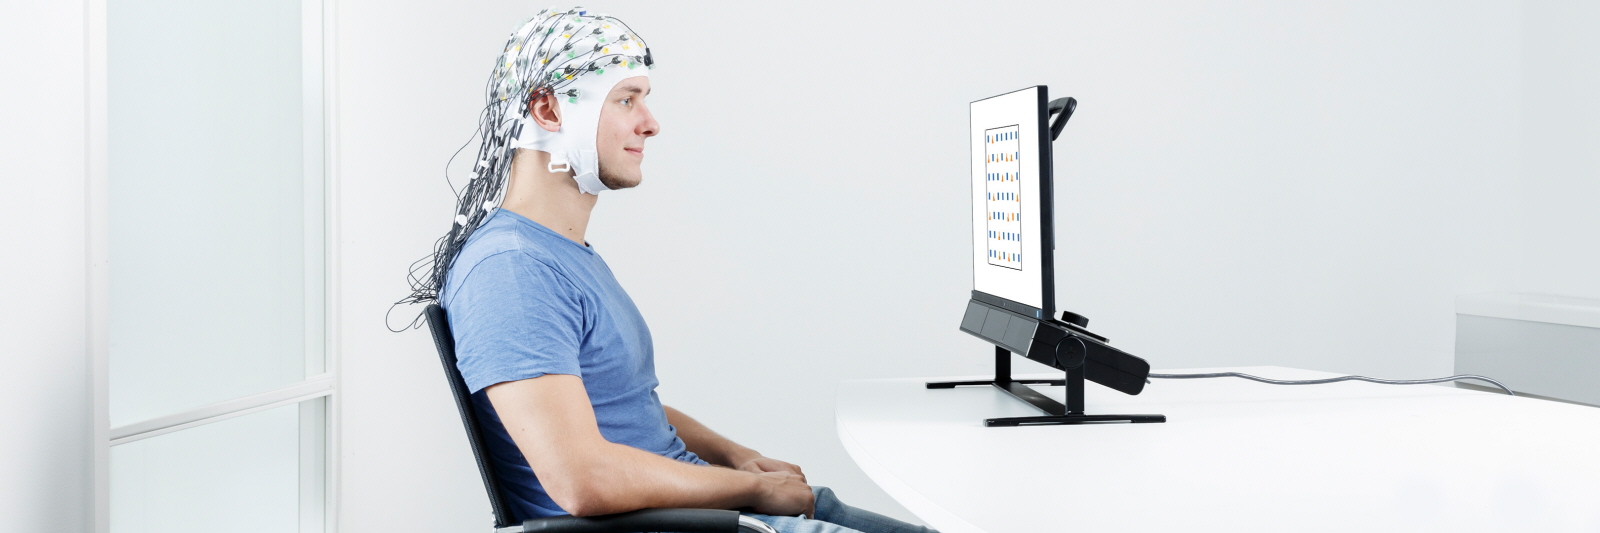 Eye tracking research in psychology and neuroscience 